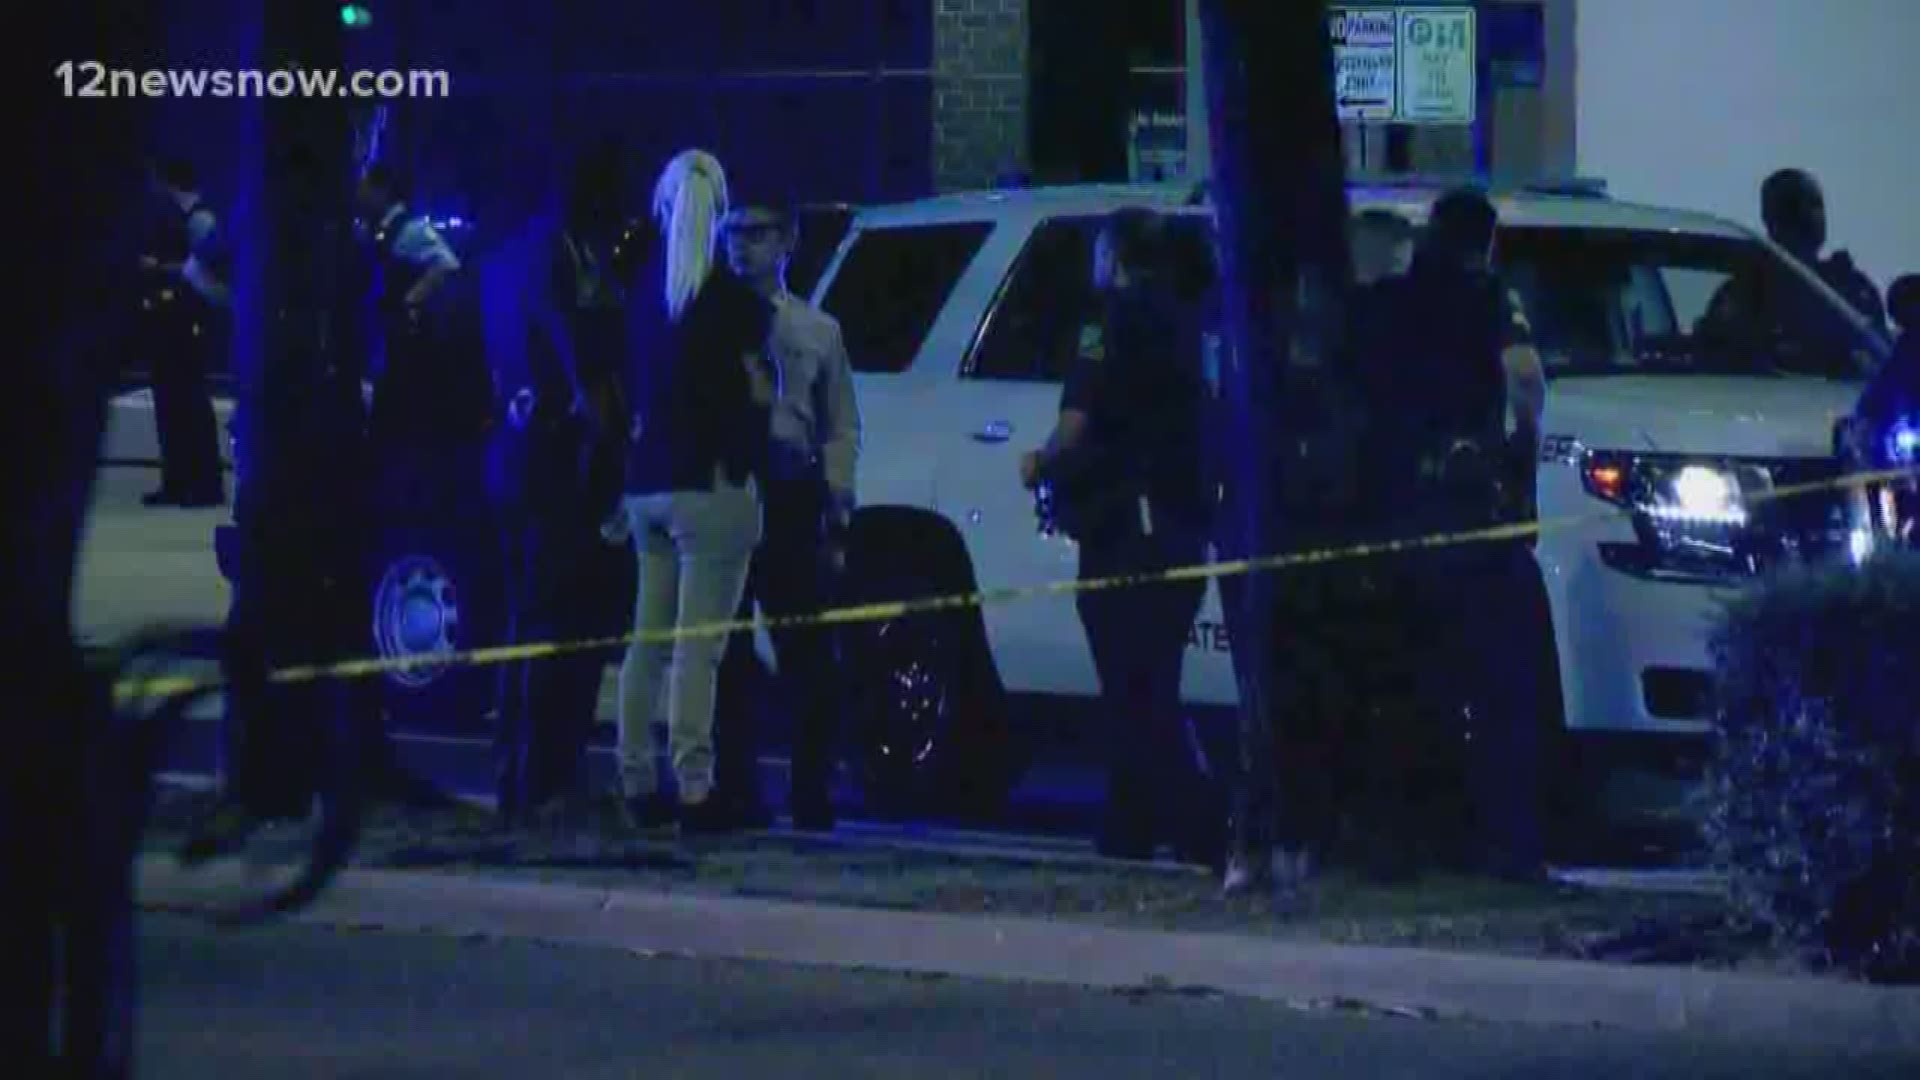 Five bystanders at a bus stop in New Orleans were shot due to a nearby armed robbery. A 17-year-old victim is currently in critical condition, while the suspect was shot dead.